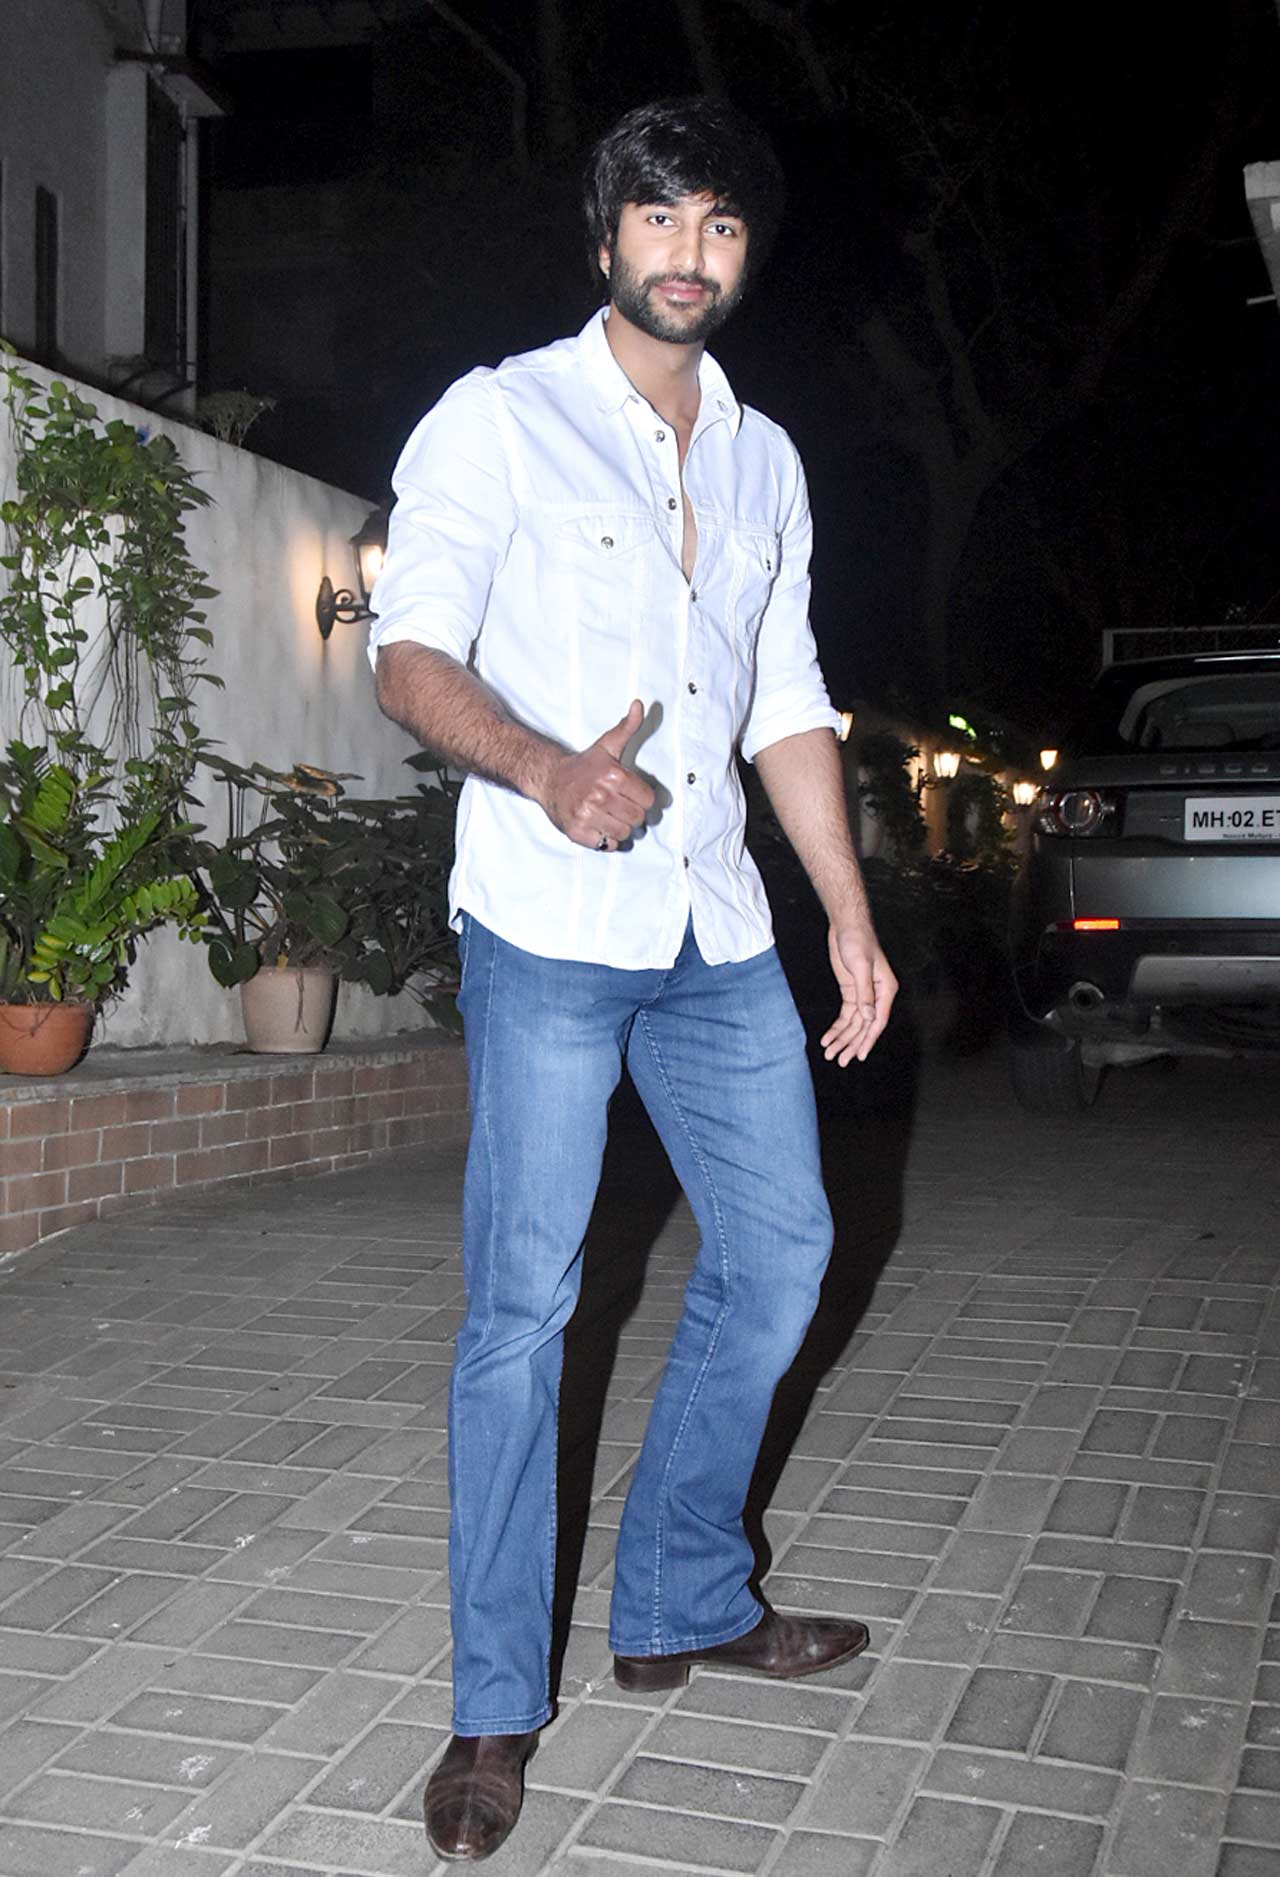 Meezaan Jafri, who made his Bollywood debut with Malaal, which was produced by Bhansali, also arrived in a cool and casual avatar. He could be seen wearing a white shirt and blue jeans.